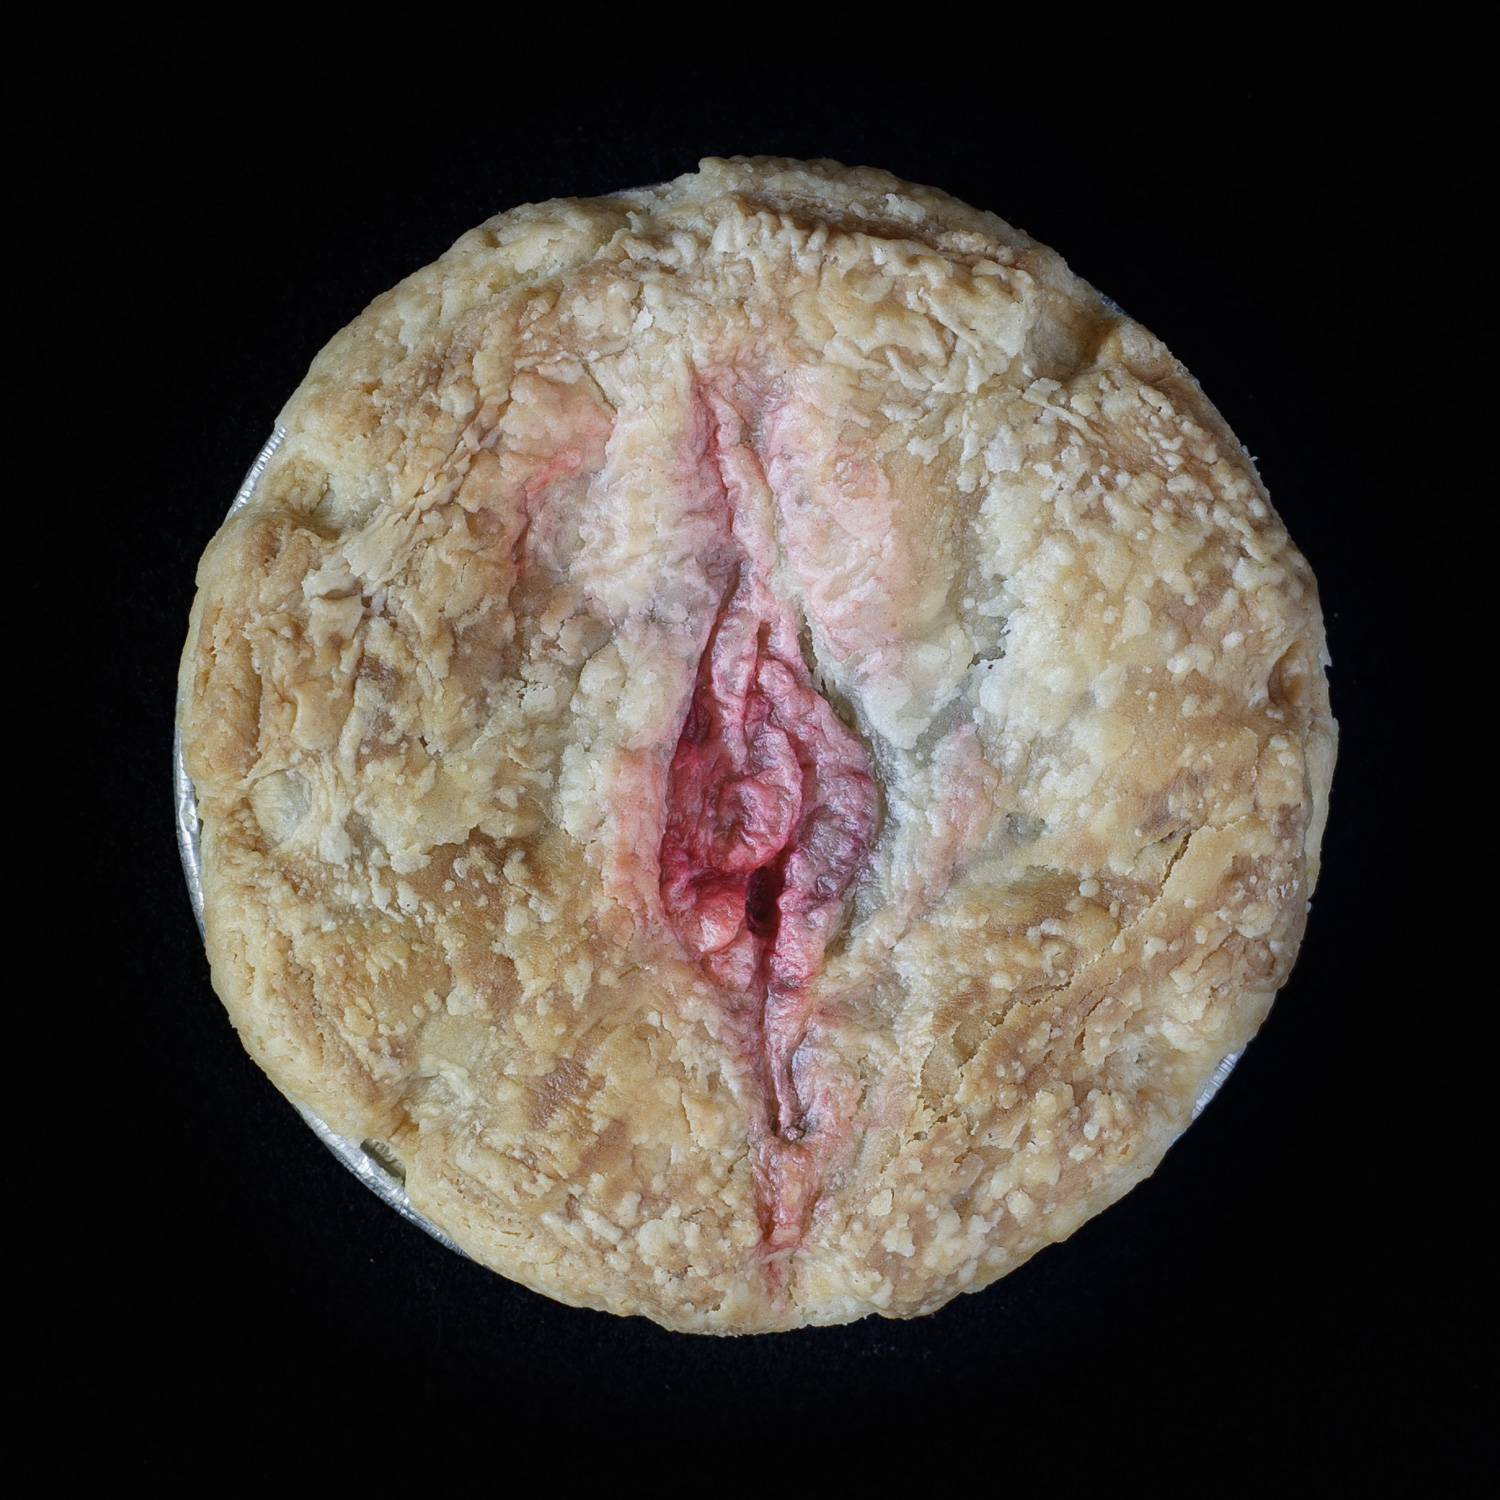 Baked Pie on a black background. The pie art depics a pink vulva